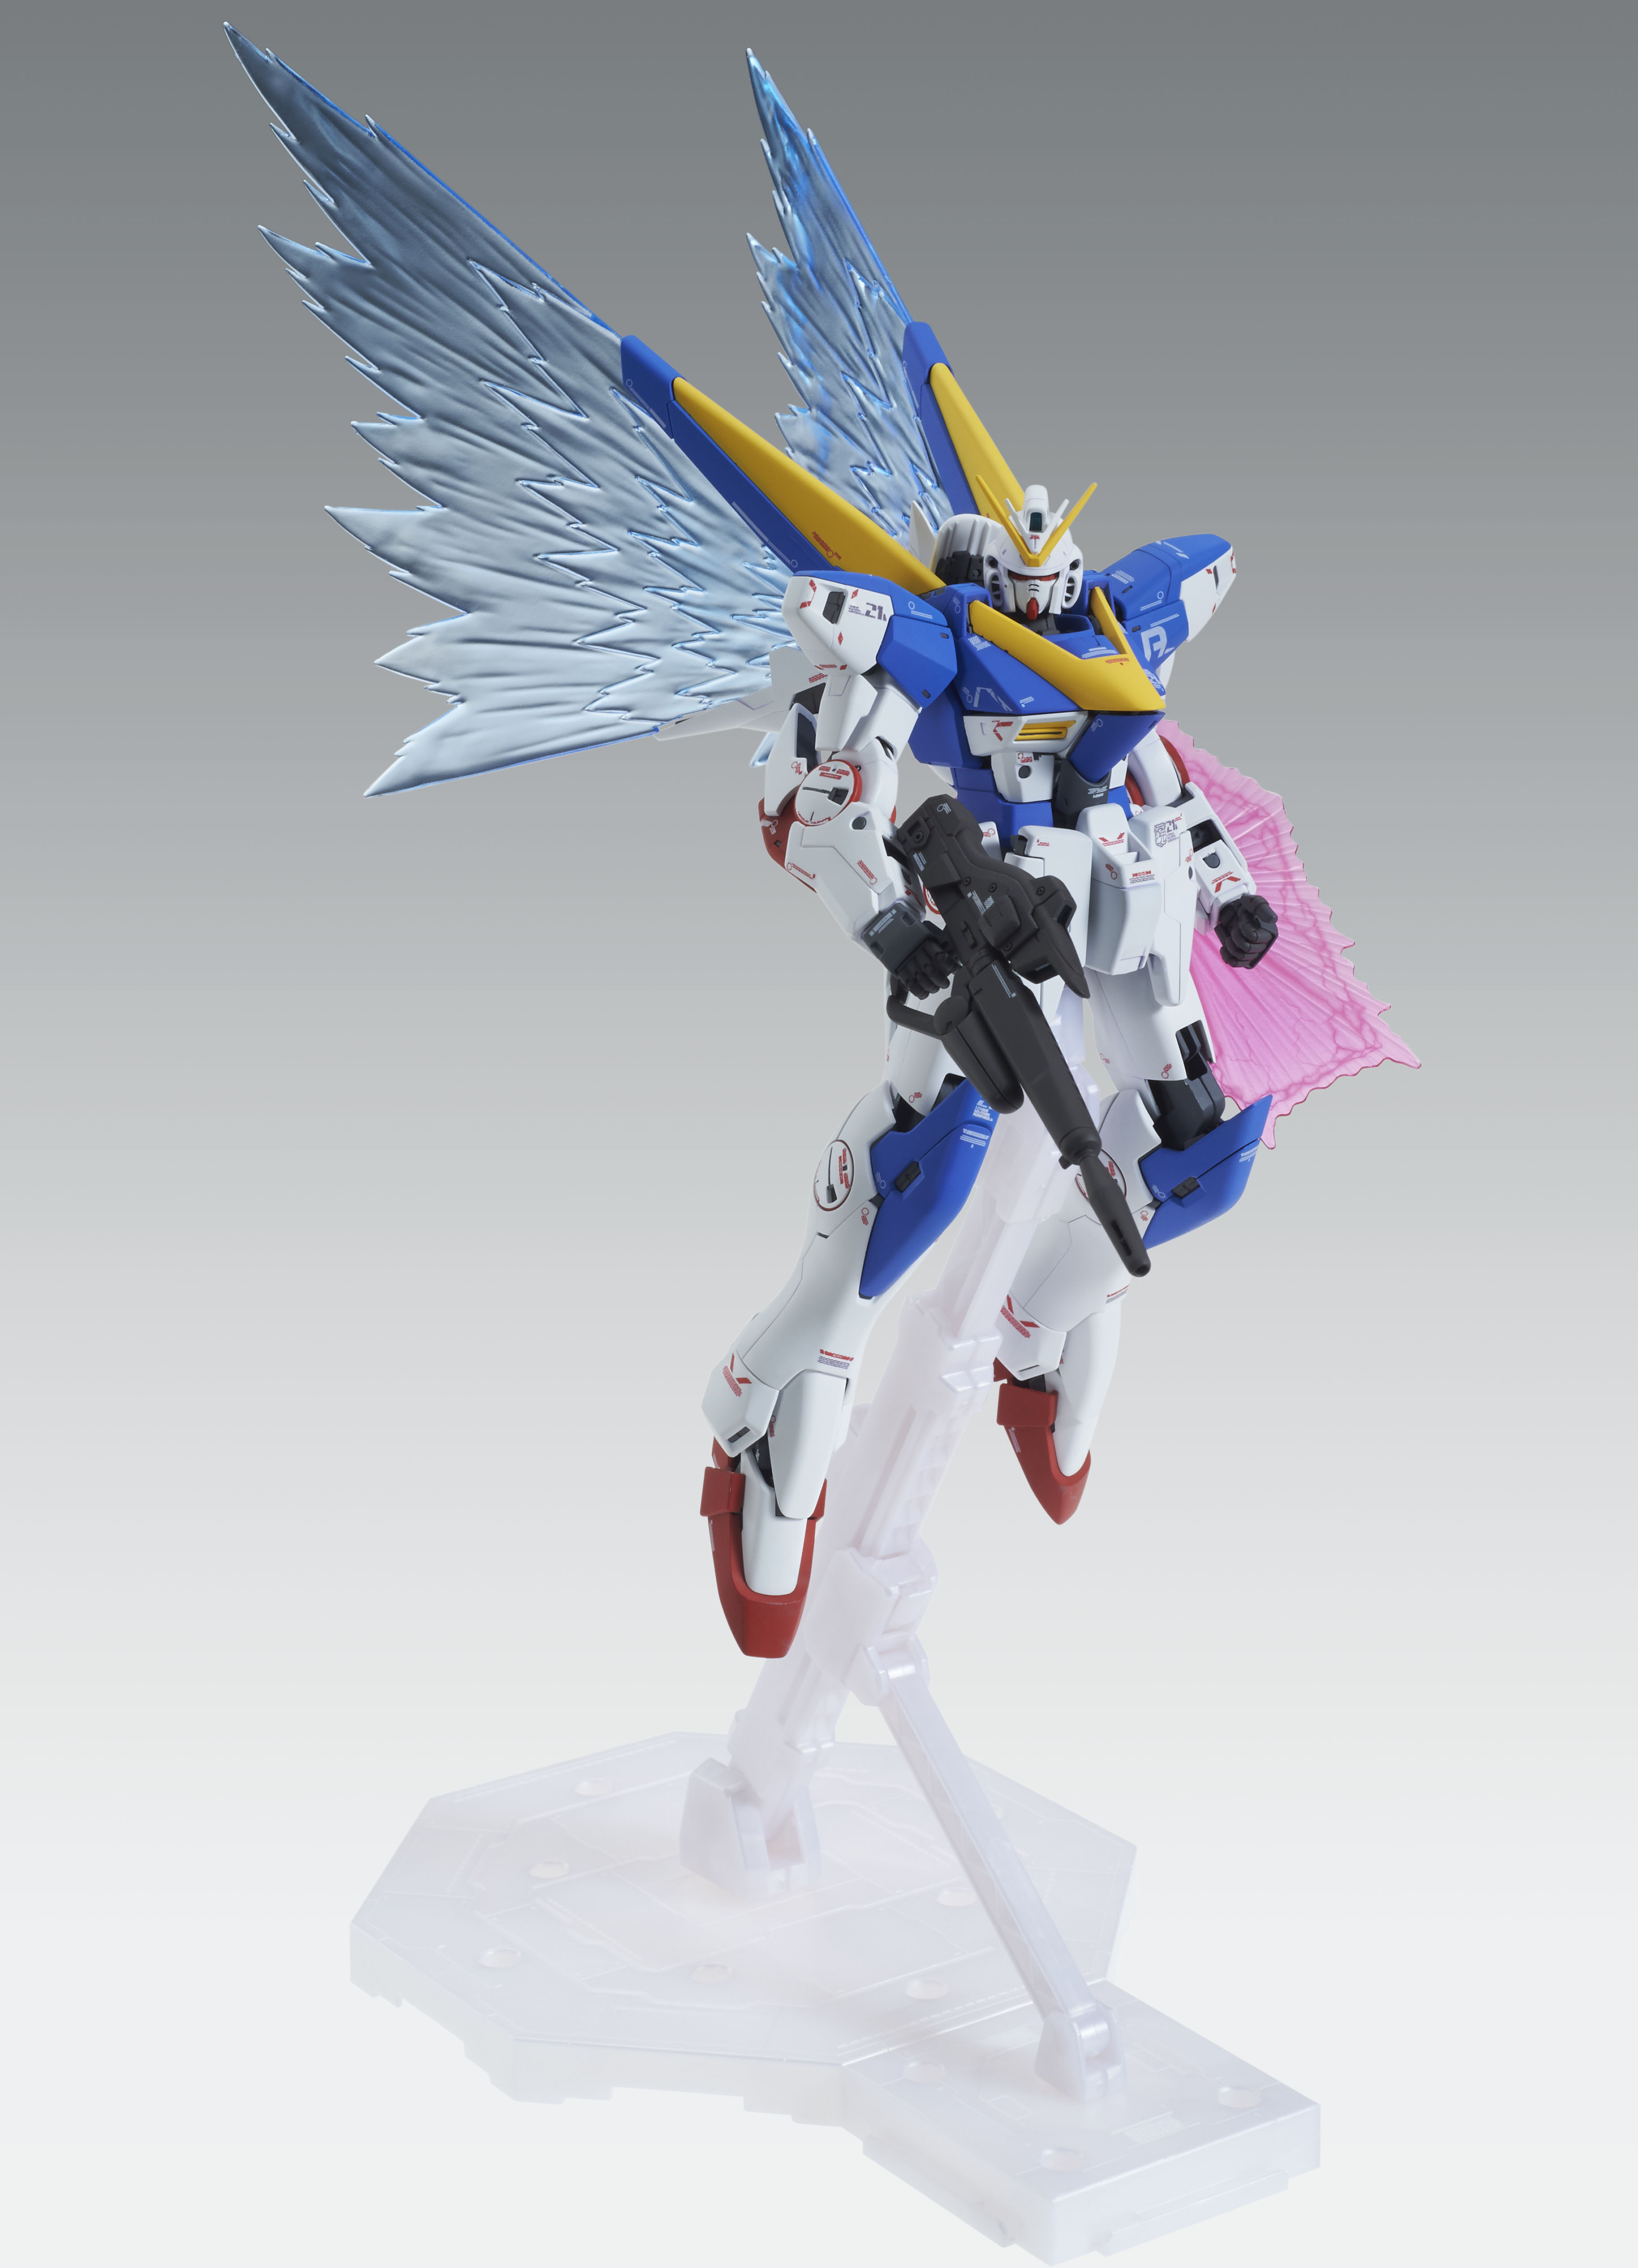 Mg 1 100 Expansion Effect Unit Wings Of Light For Victory Two Gundam Ver Ka Sep 2020 Delivery Gundam Premium Bandai Usa Online Store For Action Figures Model Kits Toys And More